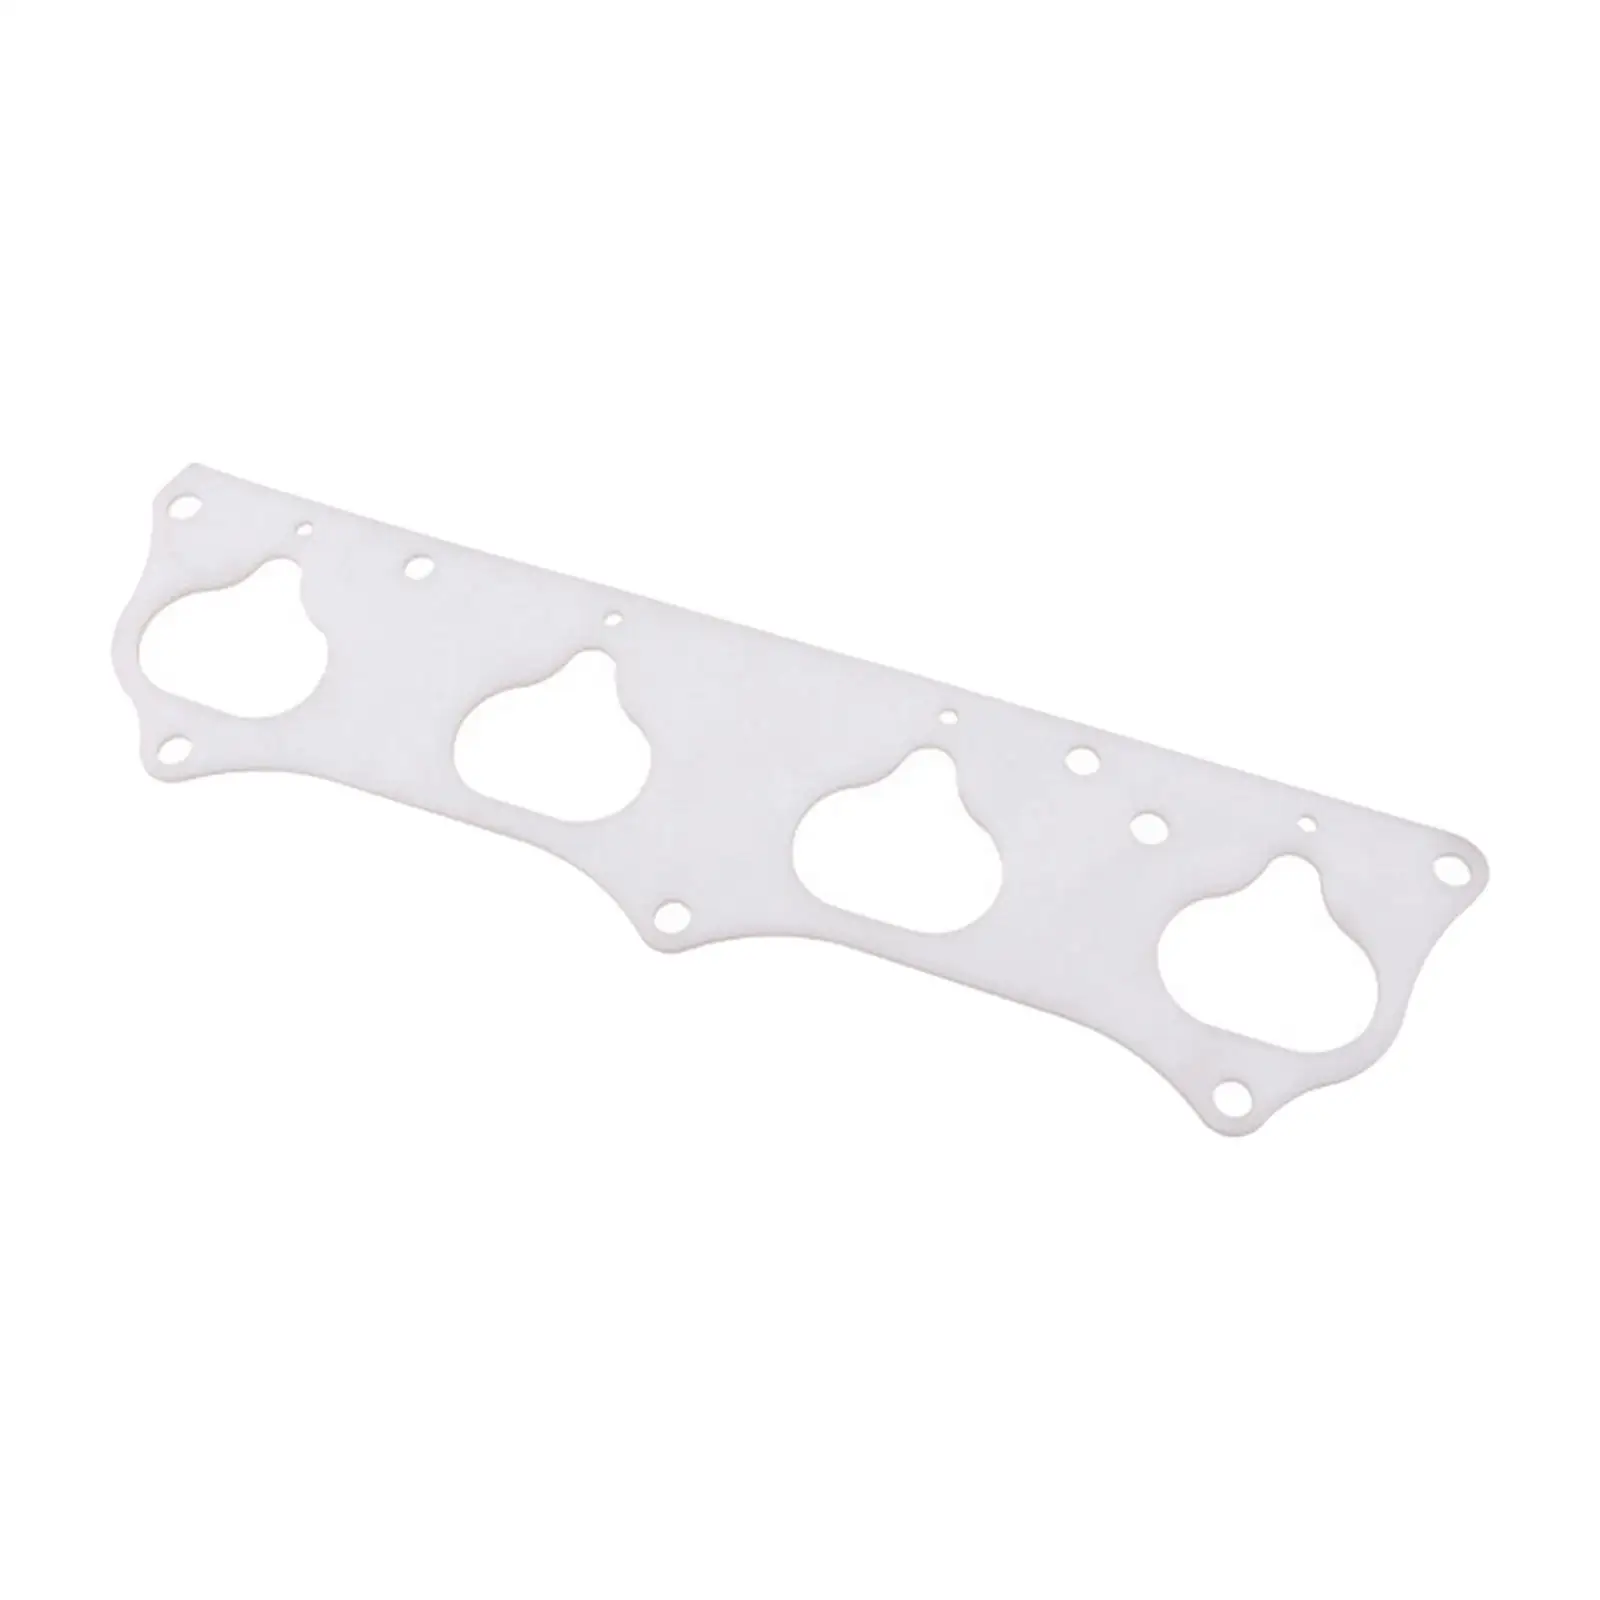 Thermal Intake Manifold Heat Shield Gasket High Performance Durable Replacement